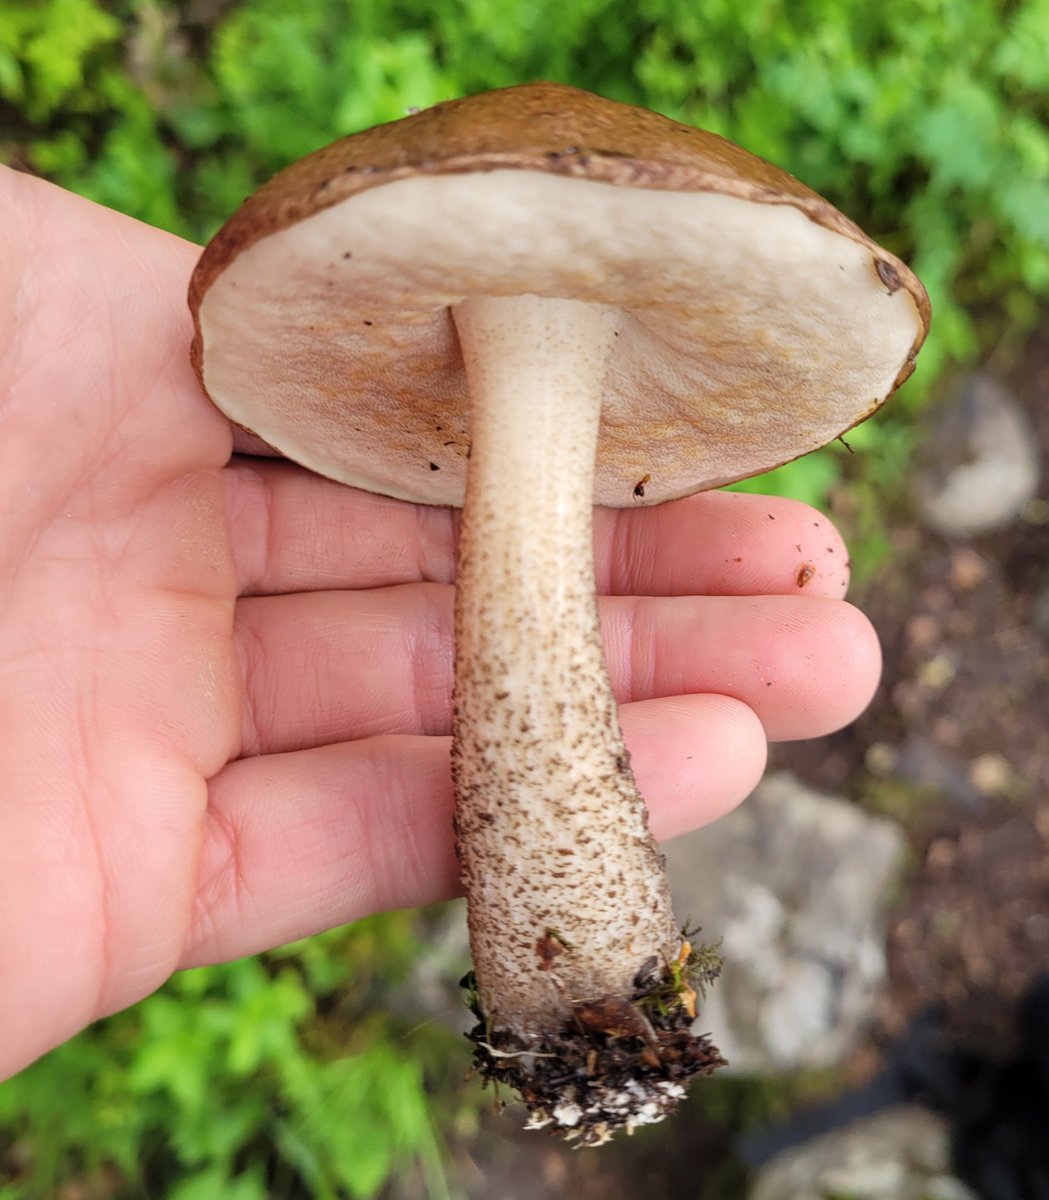 I ate this Leccinum mushroom I found while hiking in Norway. Delicious with noodles and sesame oil
#mushroom #mushroomtwitter #fungi #mushroomrecipe #foraging #eatmushrooms #mushroompicture